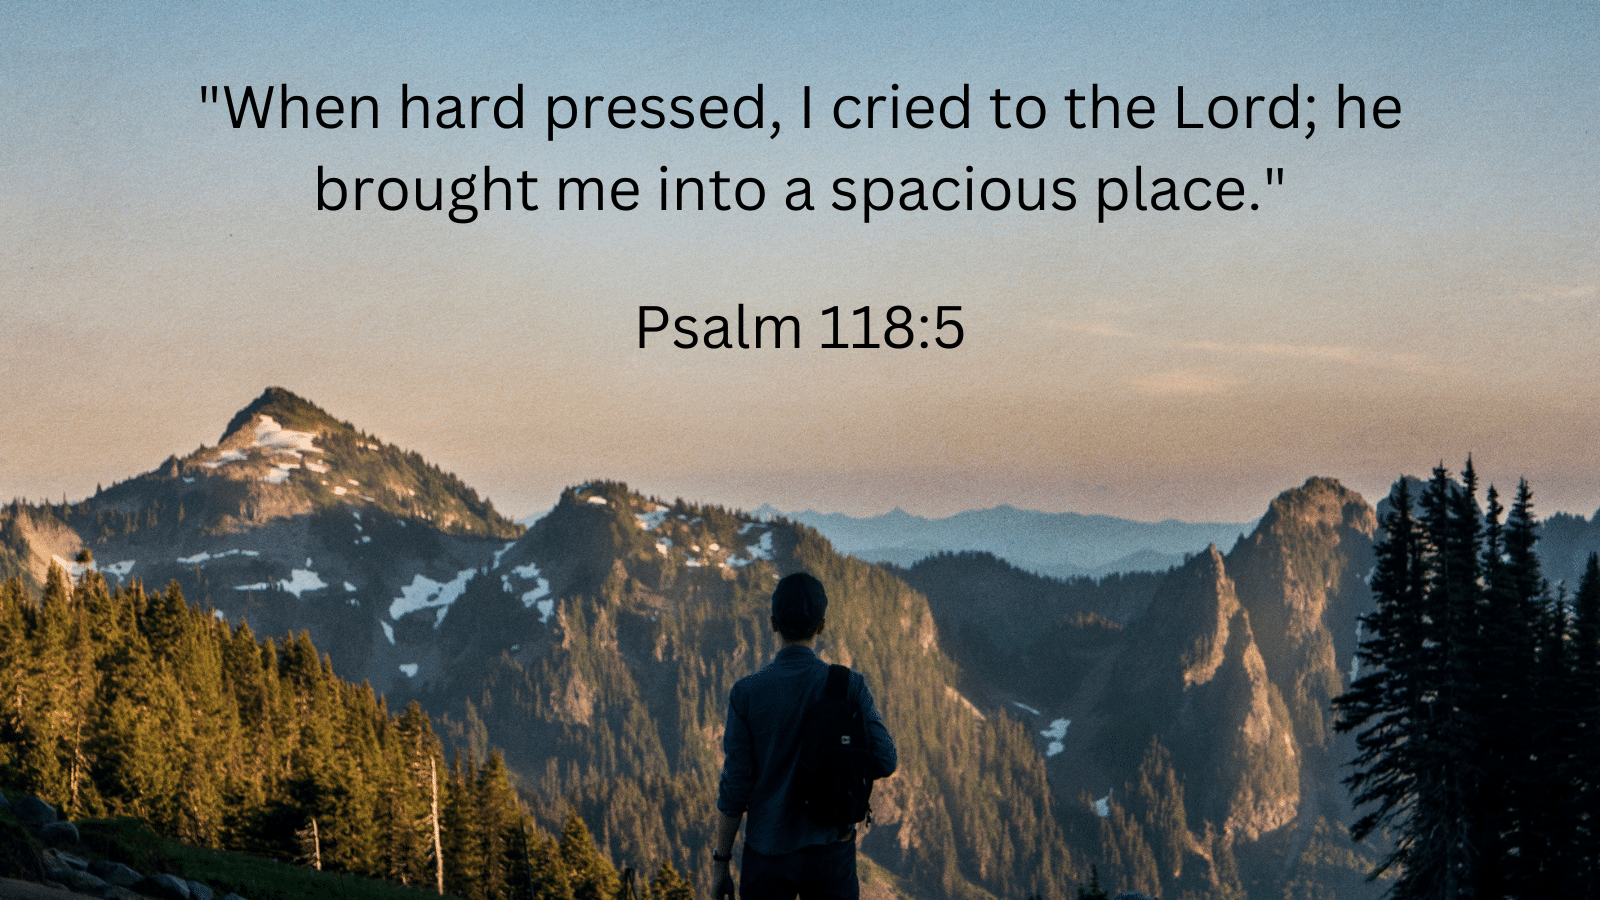 man on a mountain with Psalm 118:5